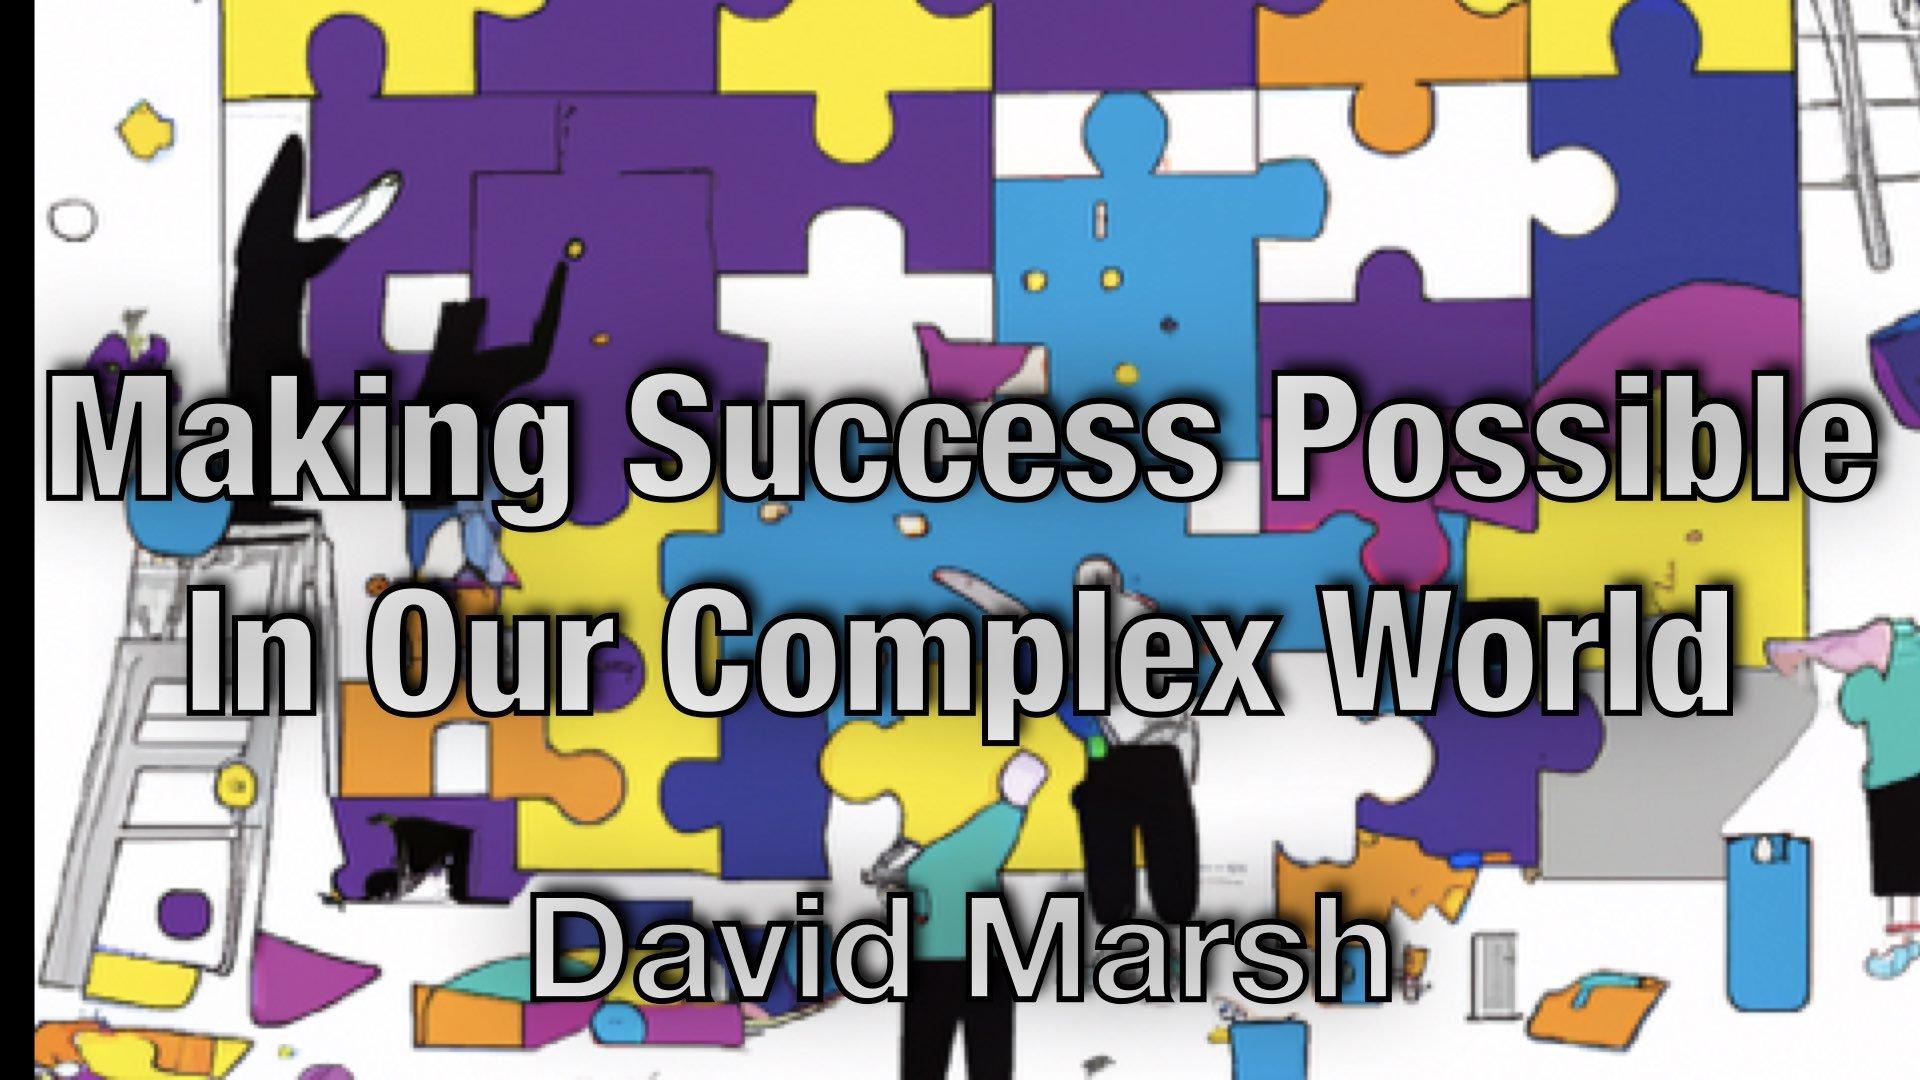 Making Success Possible In Our Complex World - David Marsh 